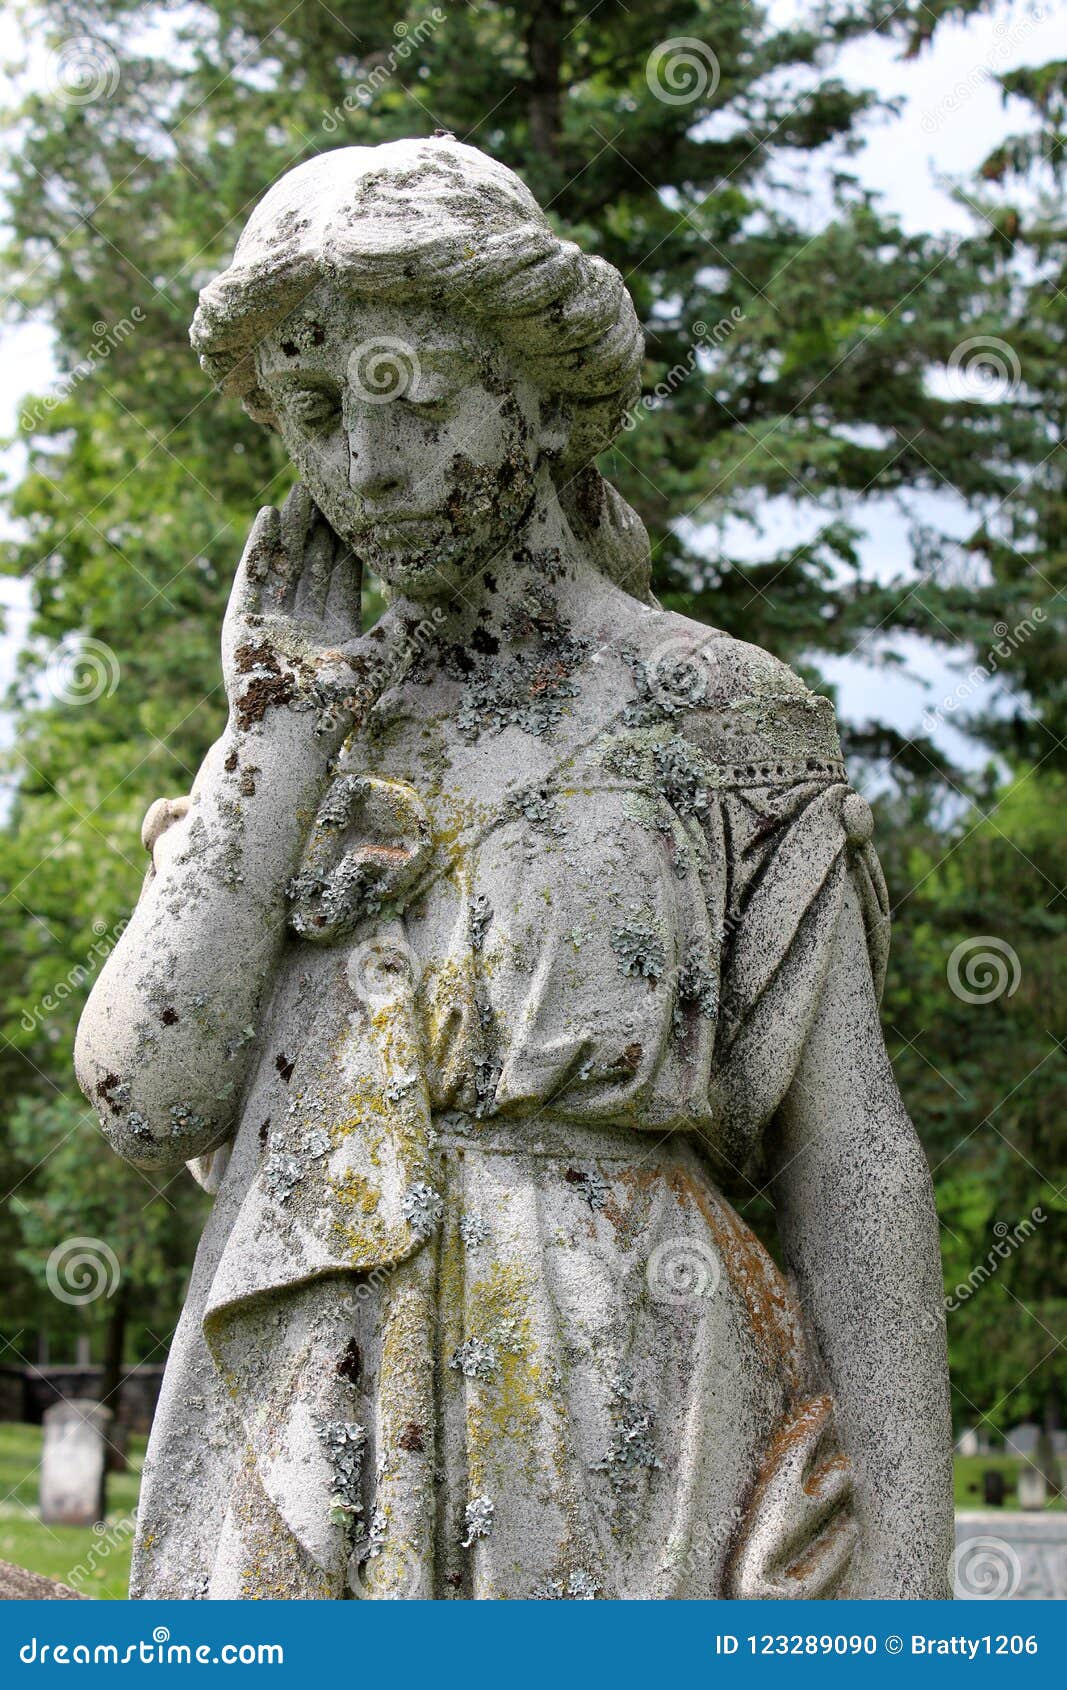 Large Stone Sculpture Of Weeping Angel Covered In Moss In Cemetery